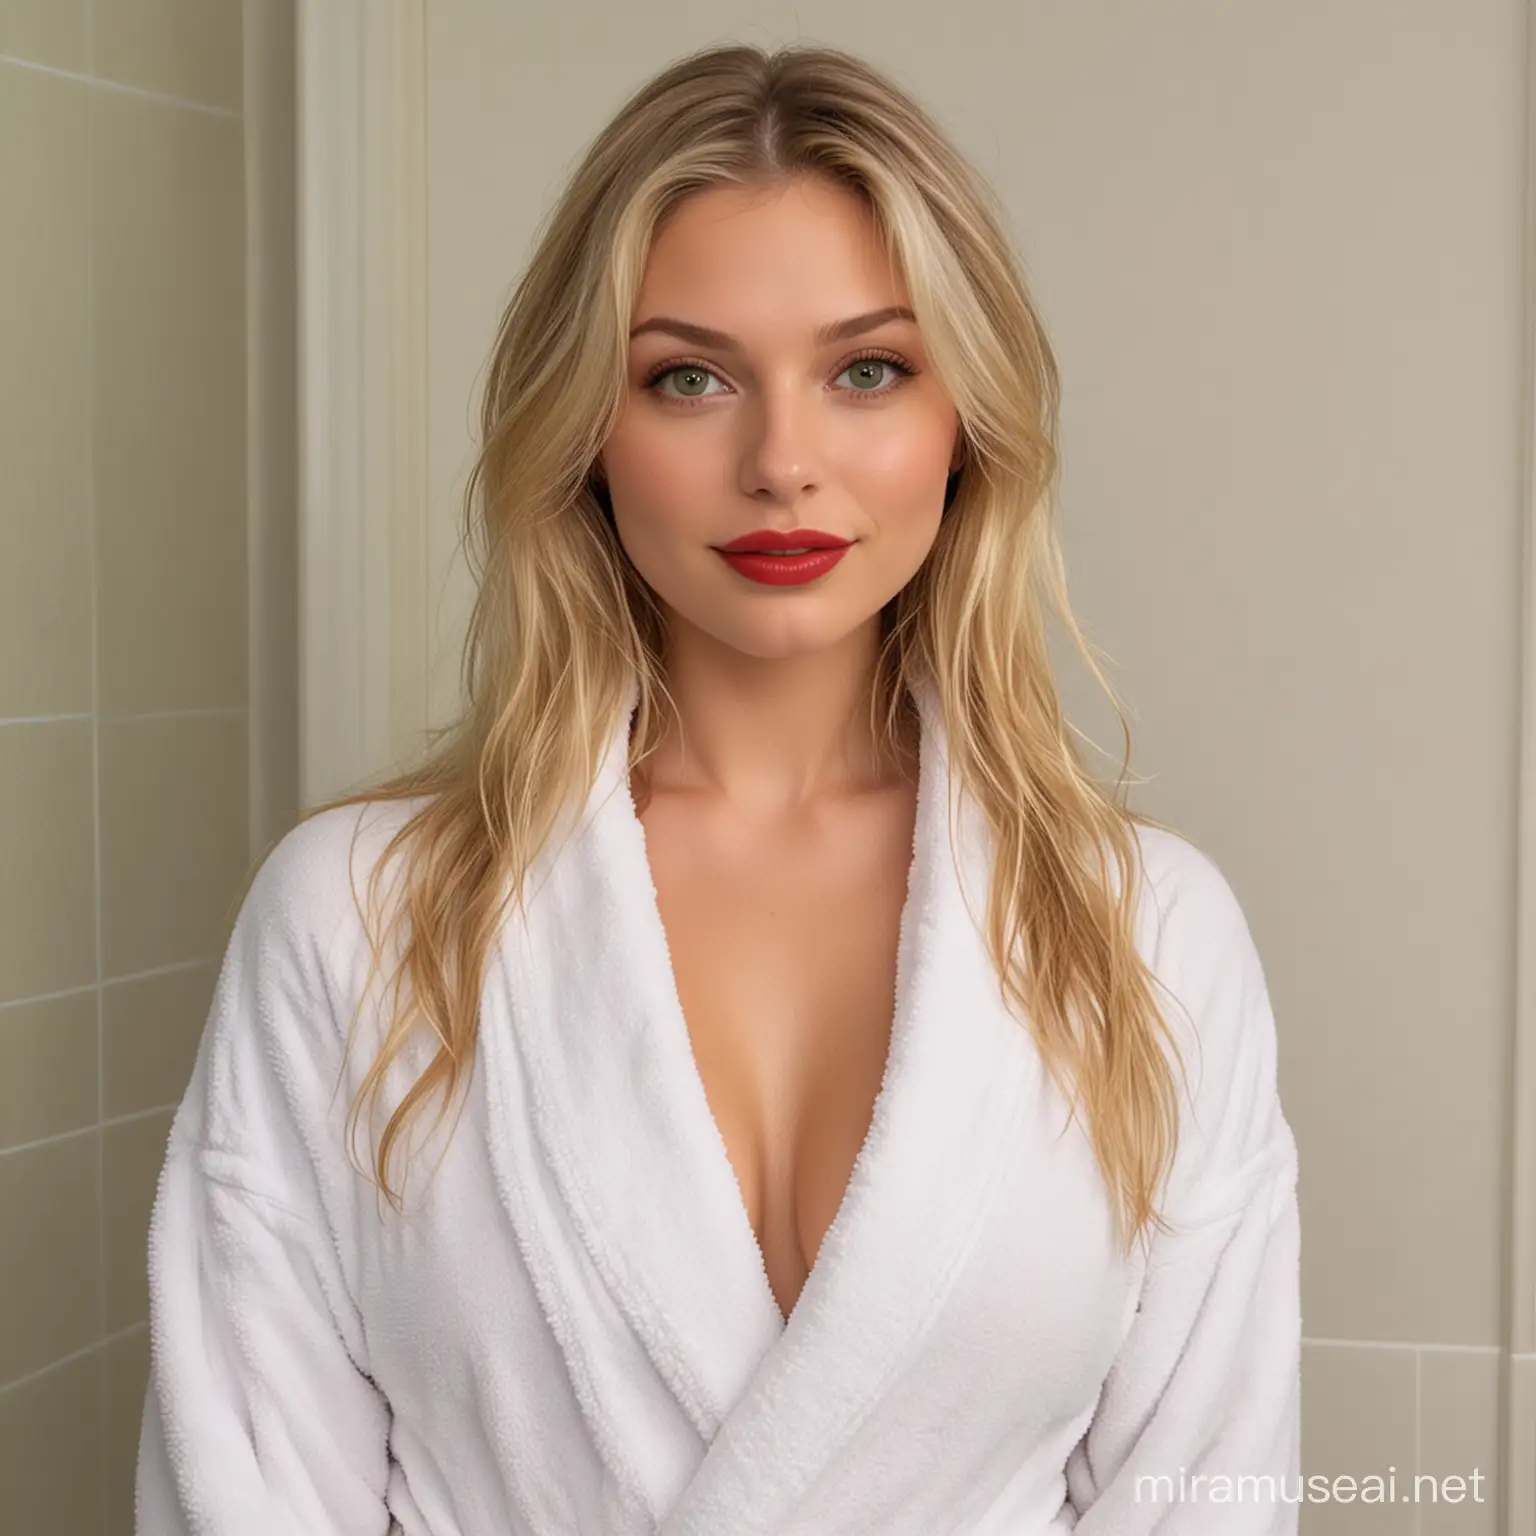 Lucy is a nice blonde female student, mid twenties, long blond hair, attractive face, green eyes, full red lips, marked cheekbones. five feet six inches tall, full young bosom. Measurement 38-24-36. She is stark naked under her white fluffy bathrobe. Standing in the bathroom 